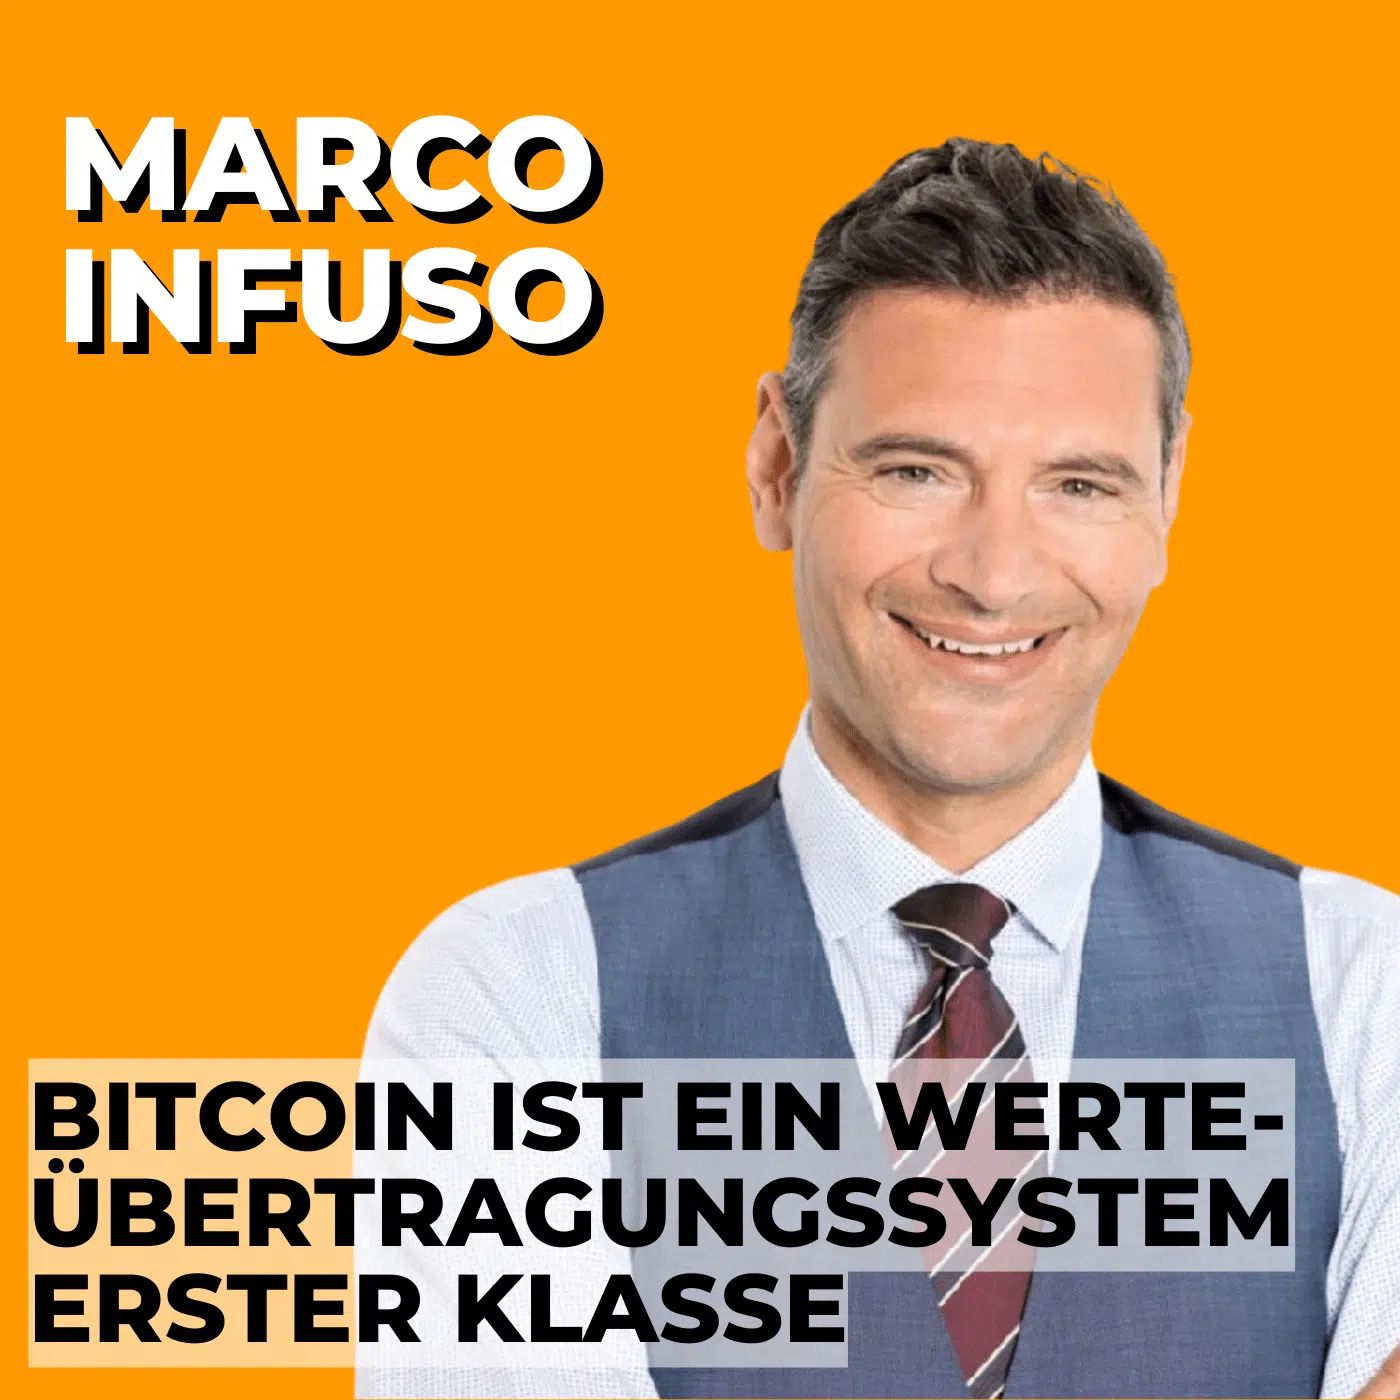 Marco Infuso